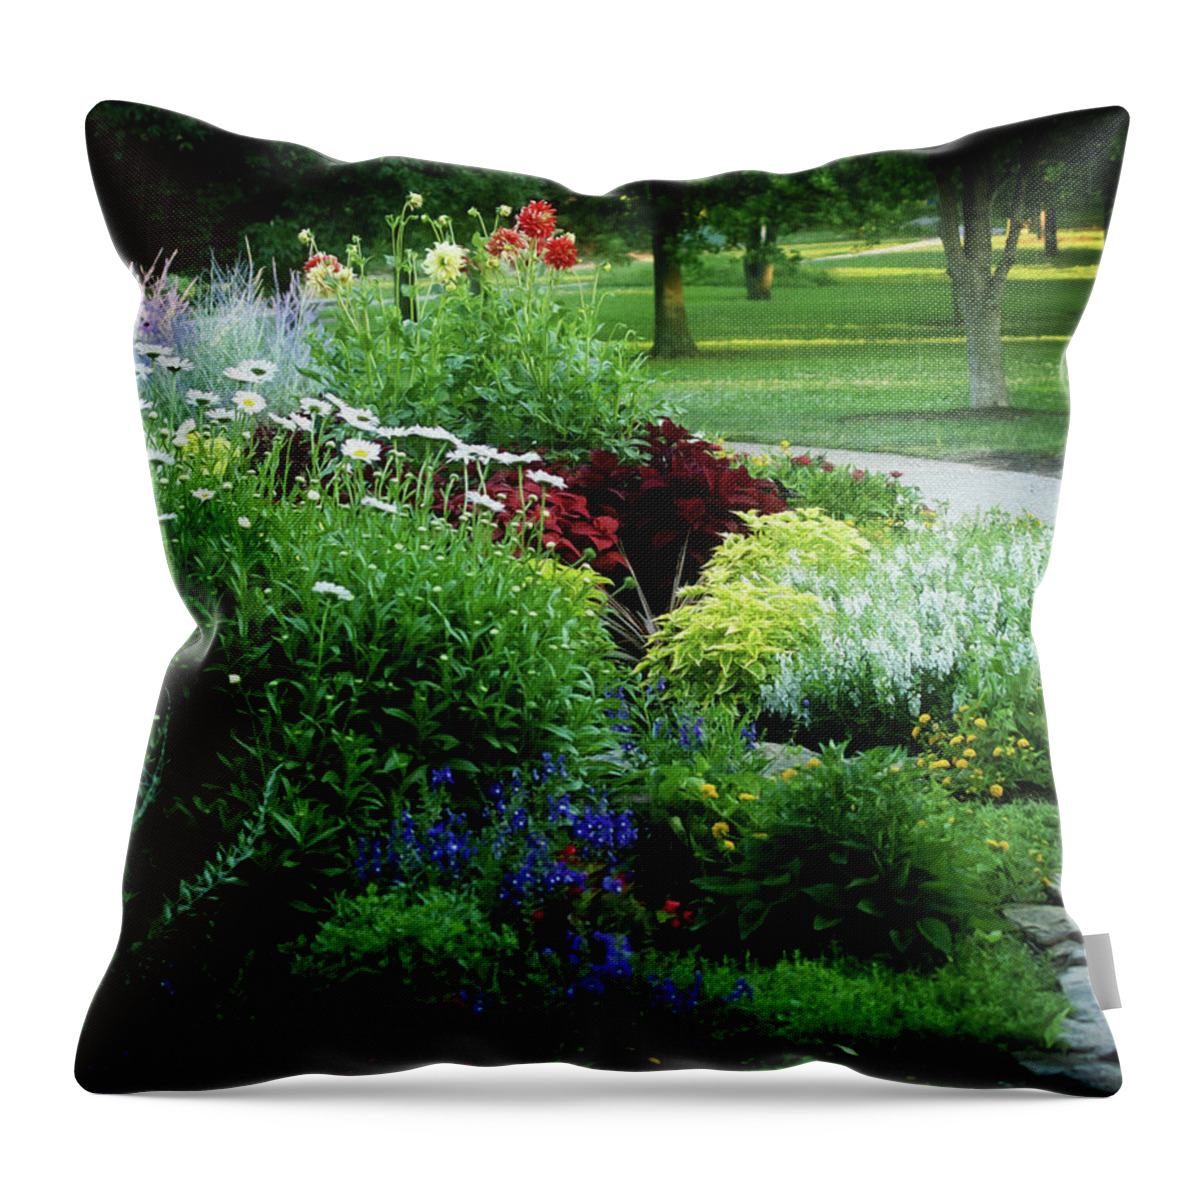 Summer Throw Pillow featuring the photograph Summer View by Lena Wilhite